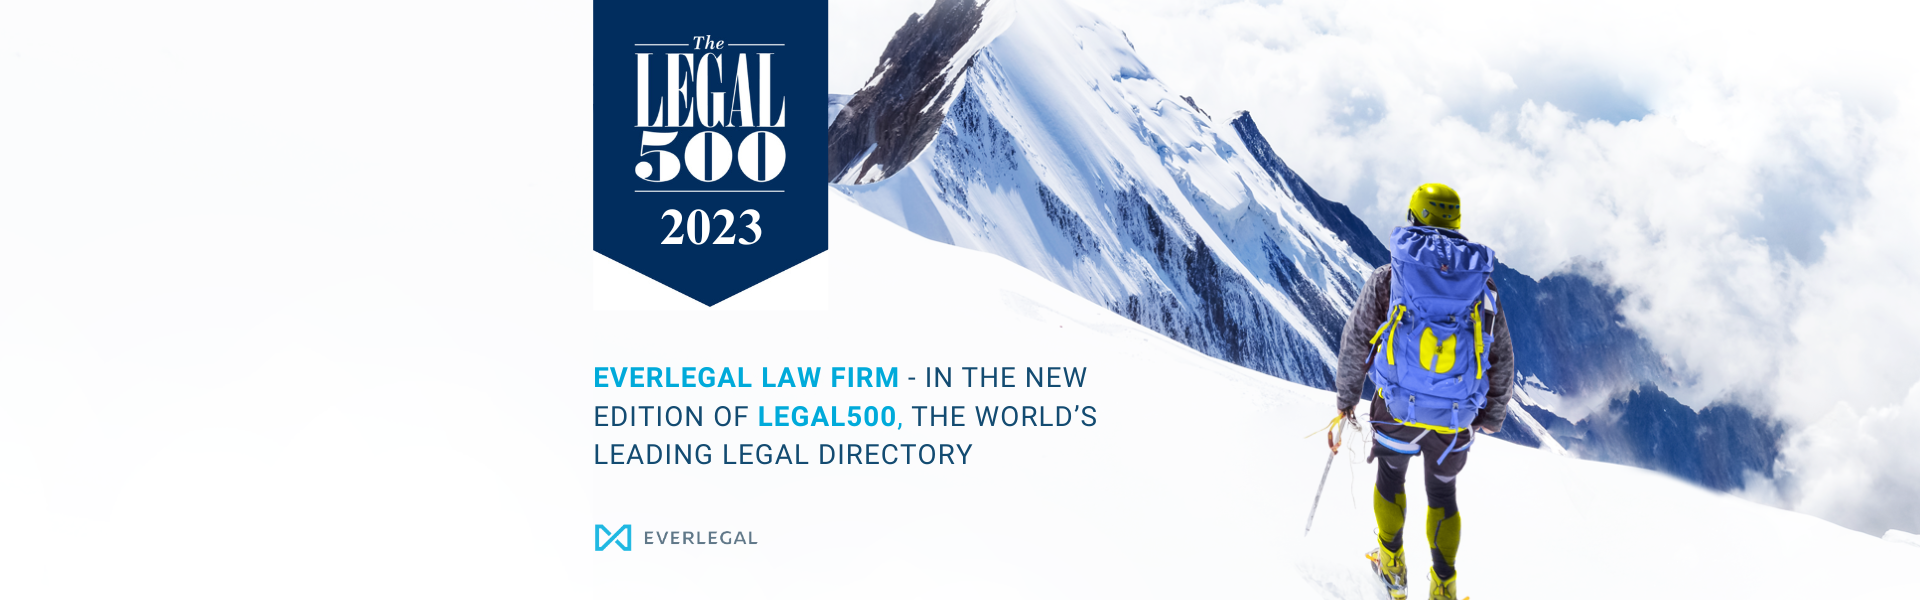 EVERLEGAL law firm - in the new edition of LEGAL500, the world’s leading legal directory